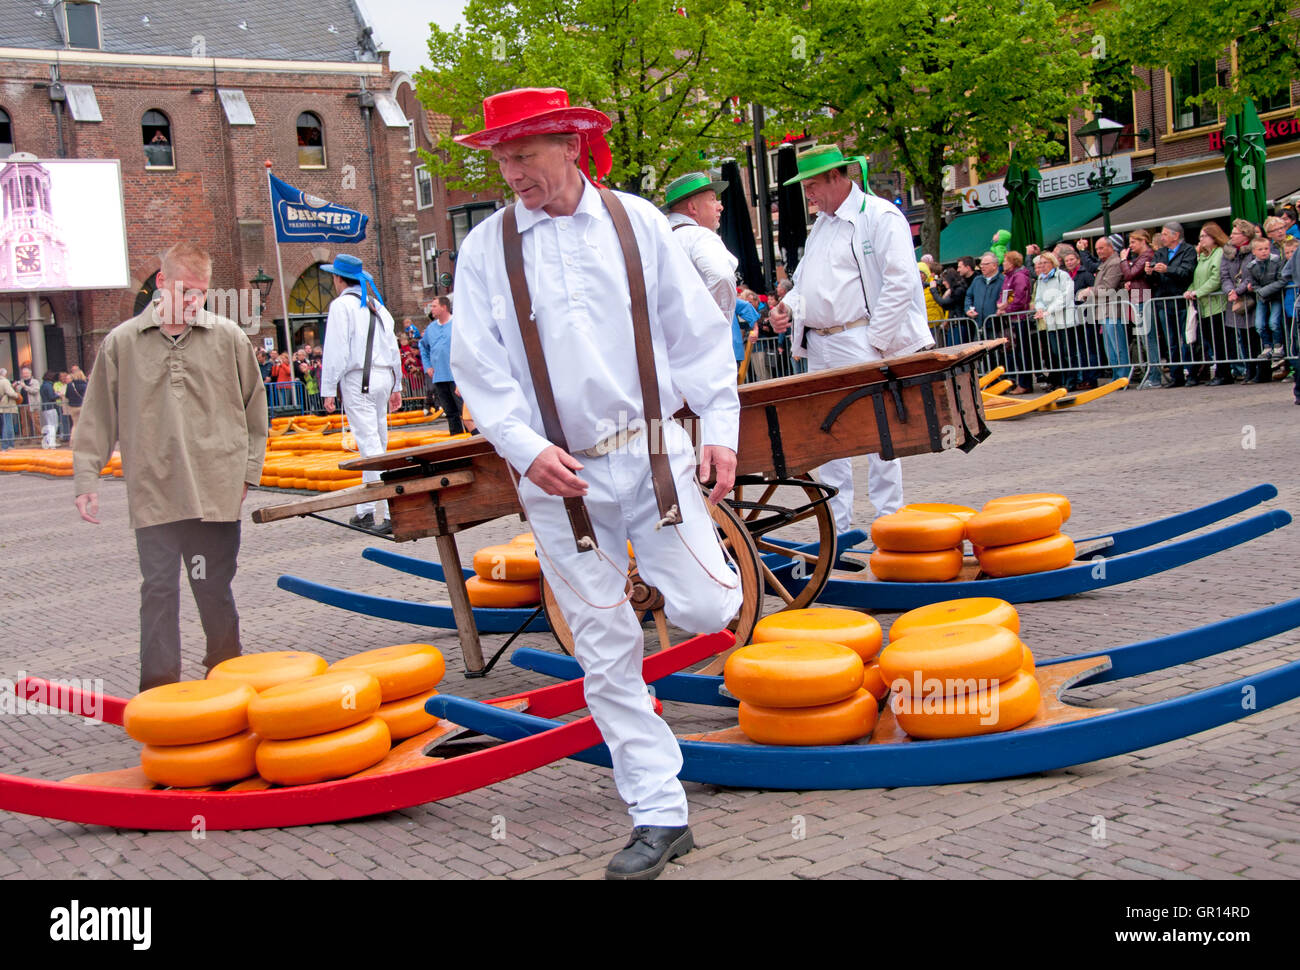 At Holland's Alkmaar Cheese Market, carriers transport the heavy cheeses on wooden sledges called 'Berries.' Stock Photo